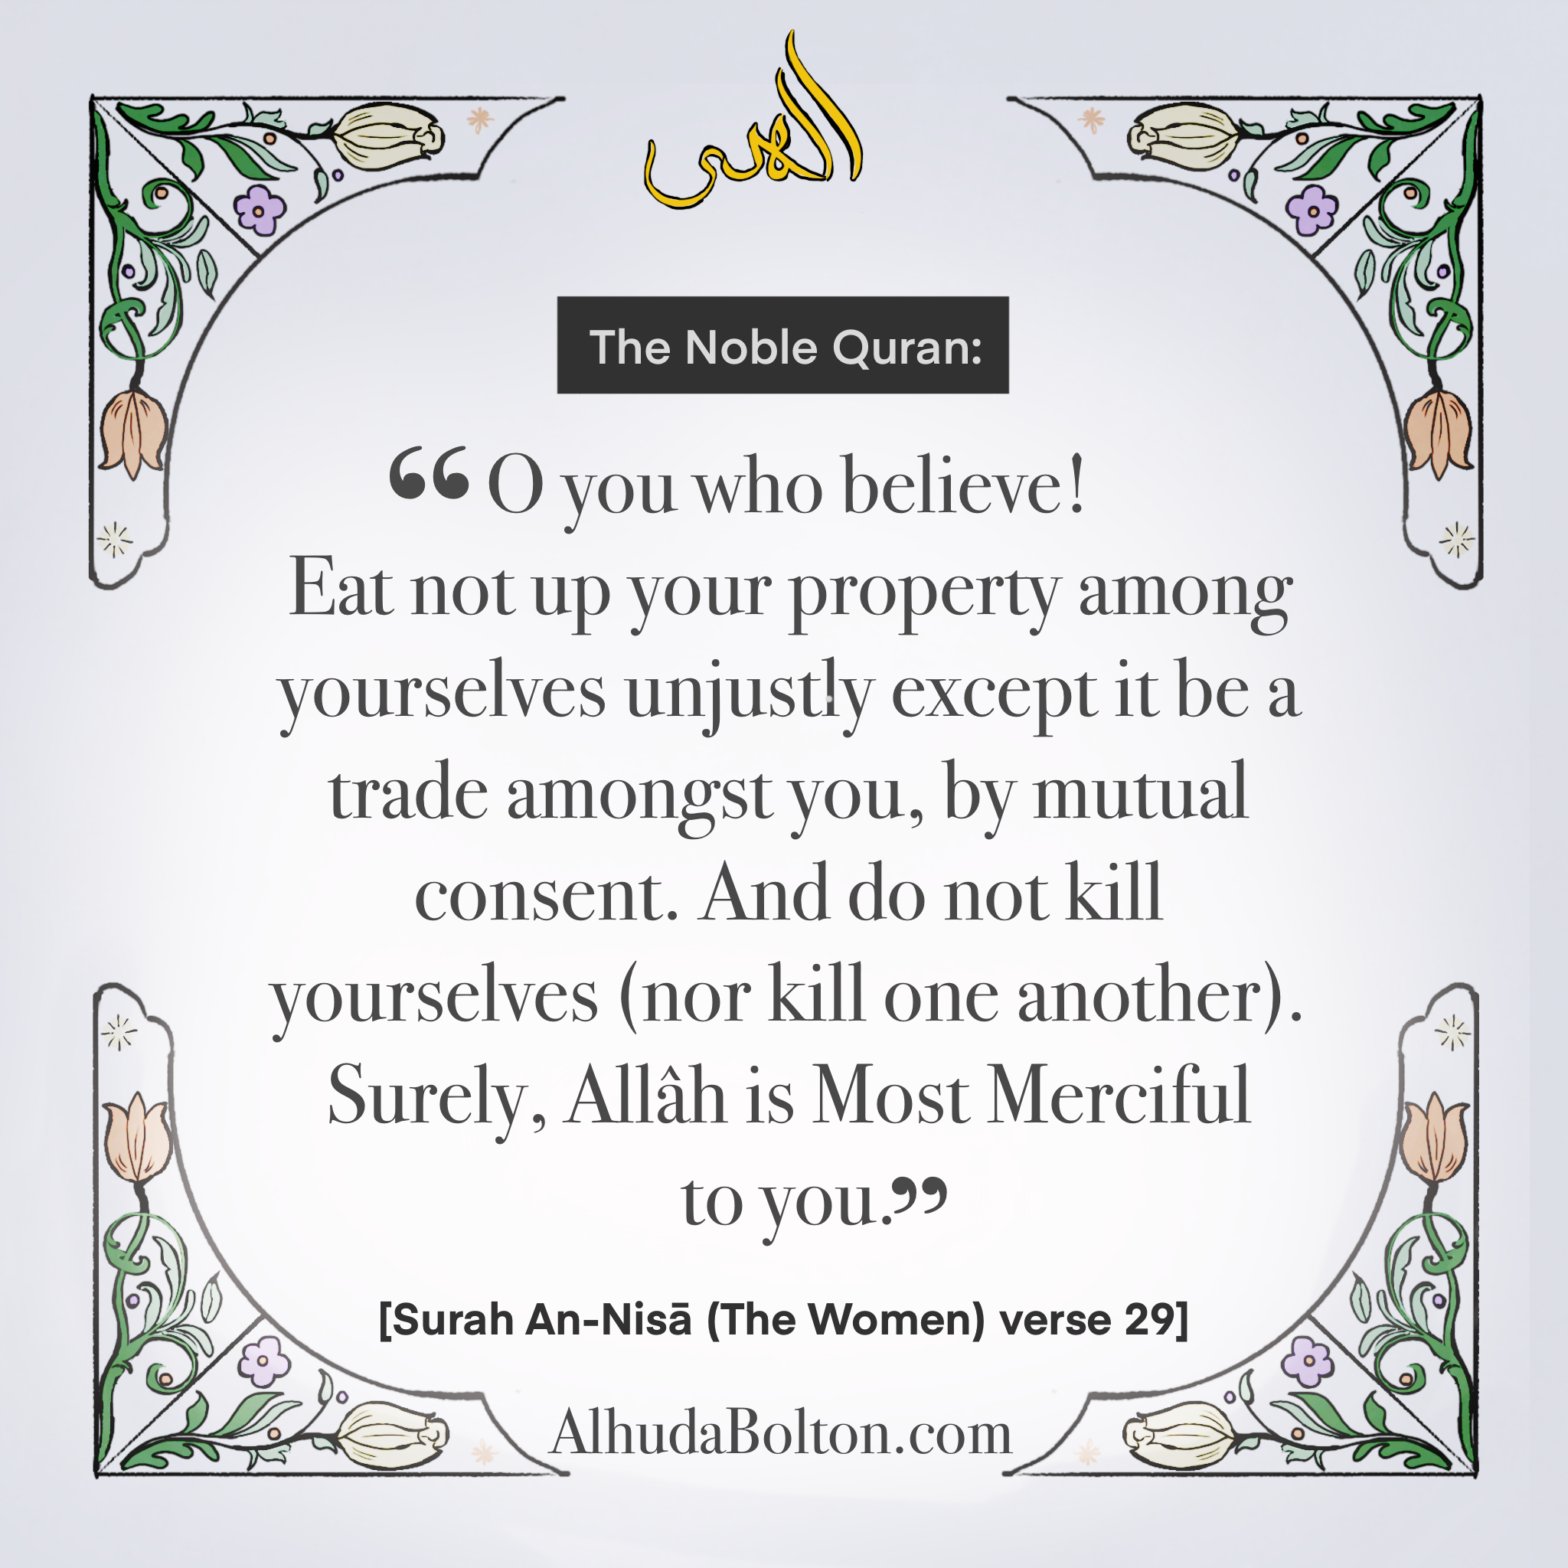 Quran: “And do not kill yourselves”